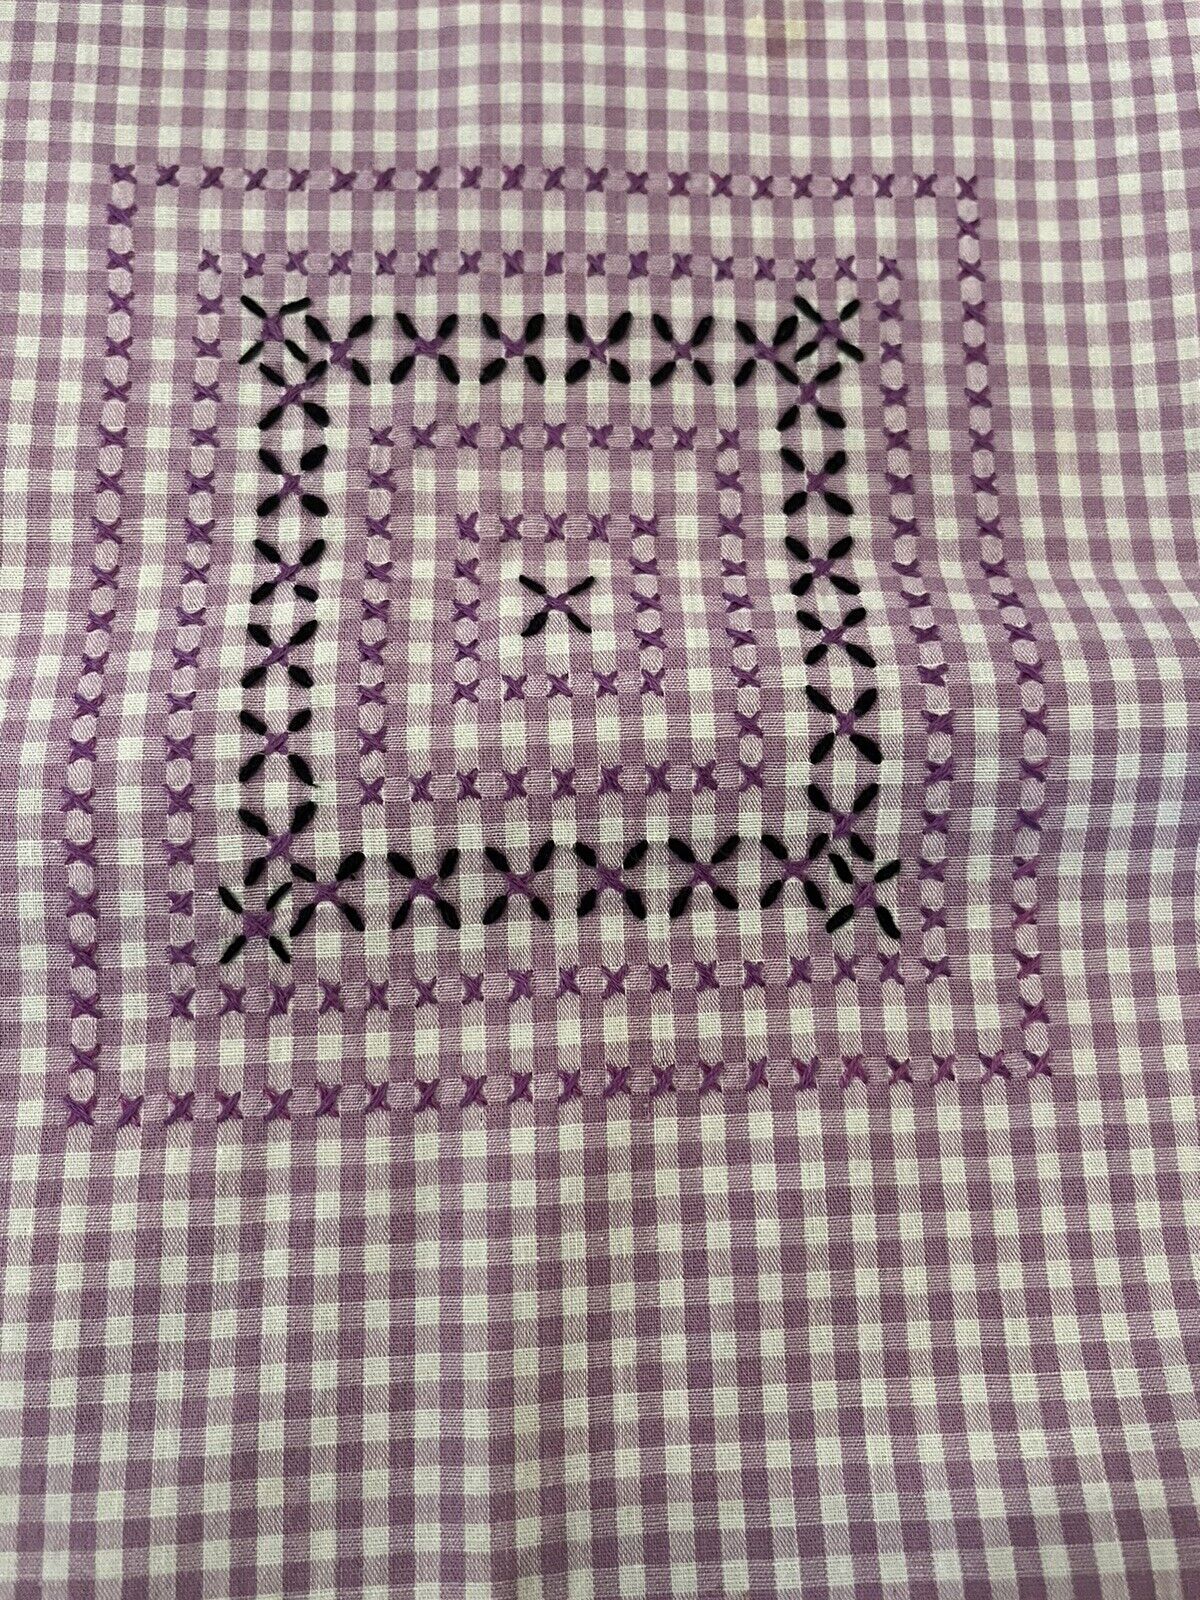 Vintage Hand Made Gingham Checked Table Cloth Table Topper Light Purple Xstitch